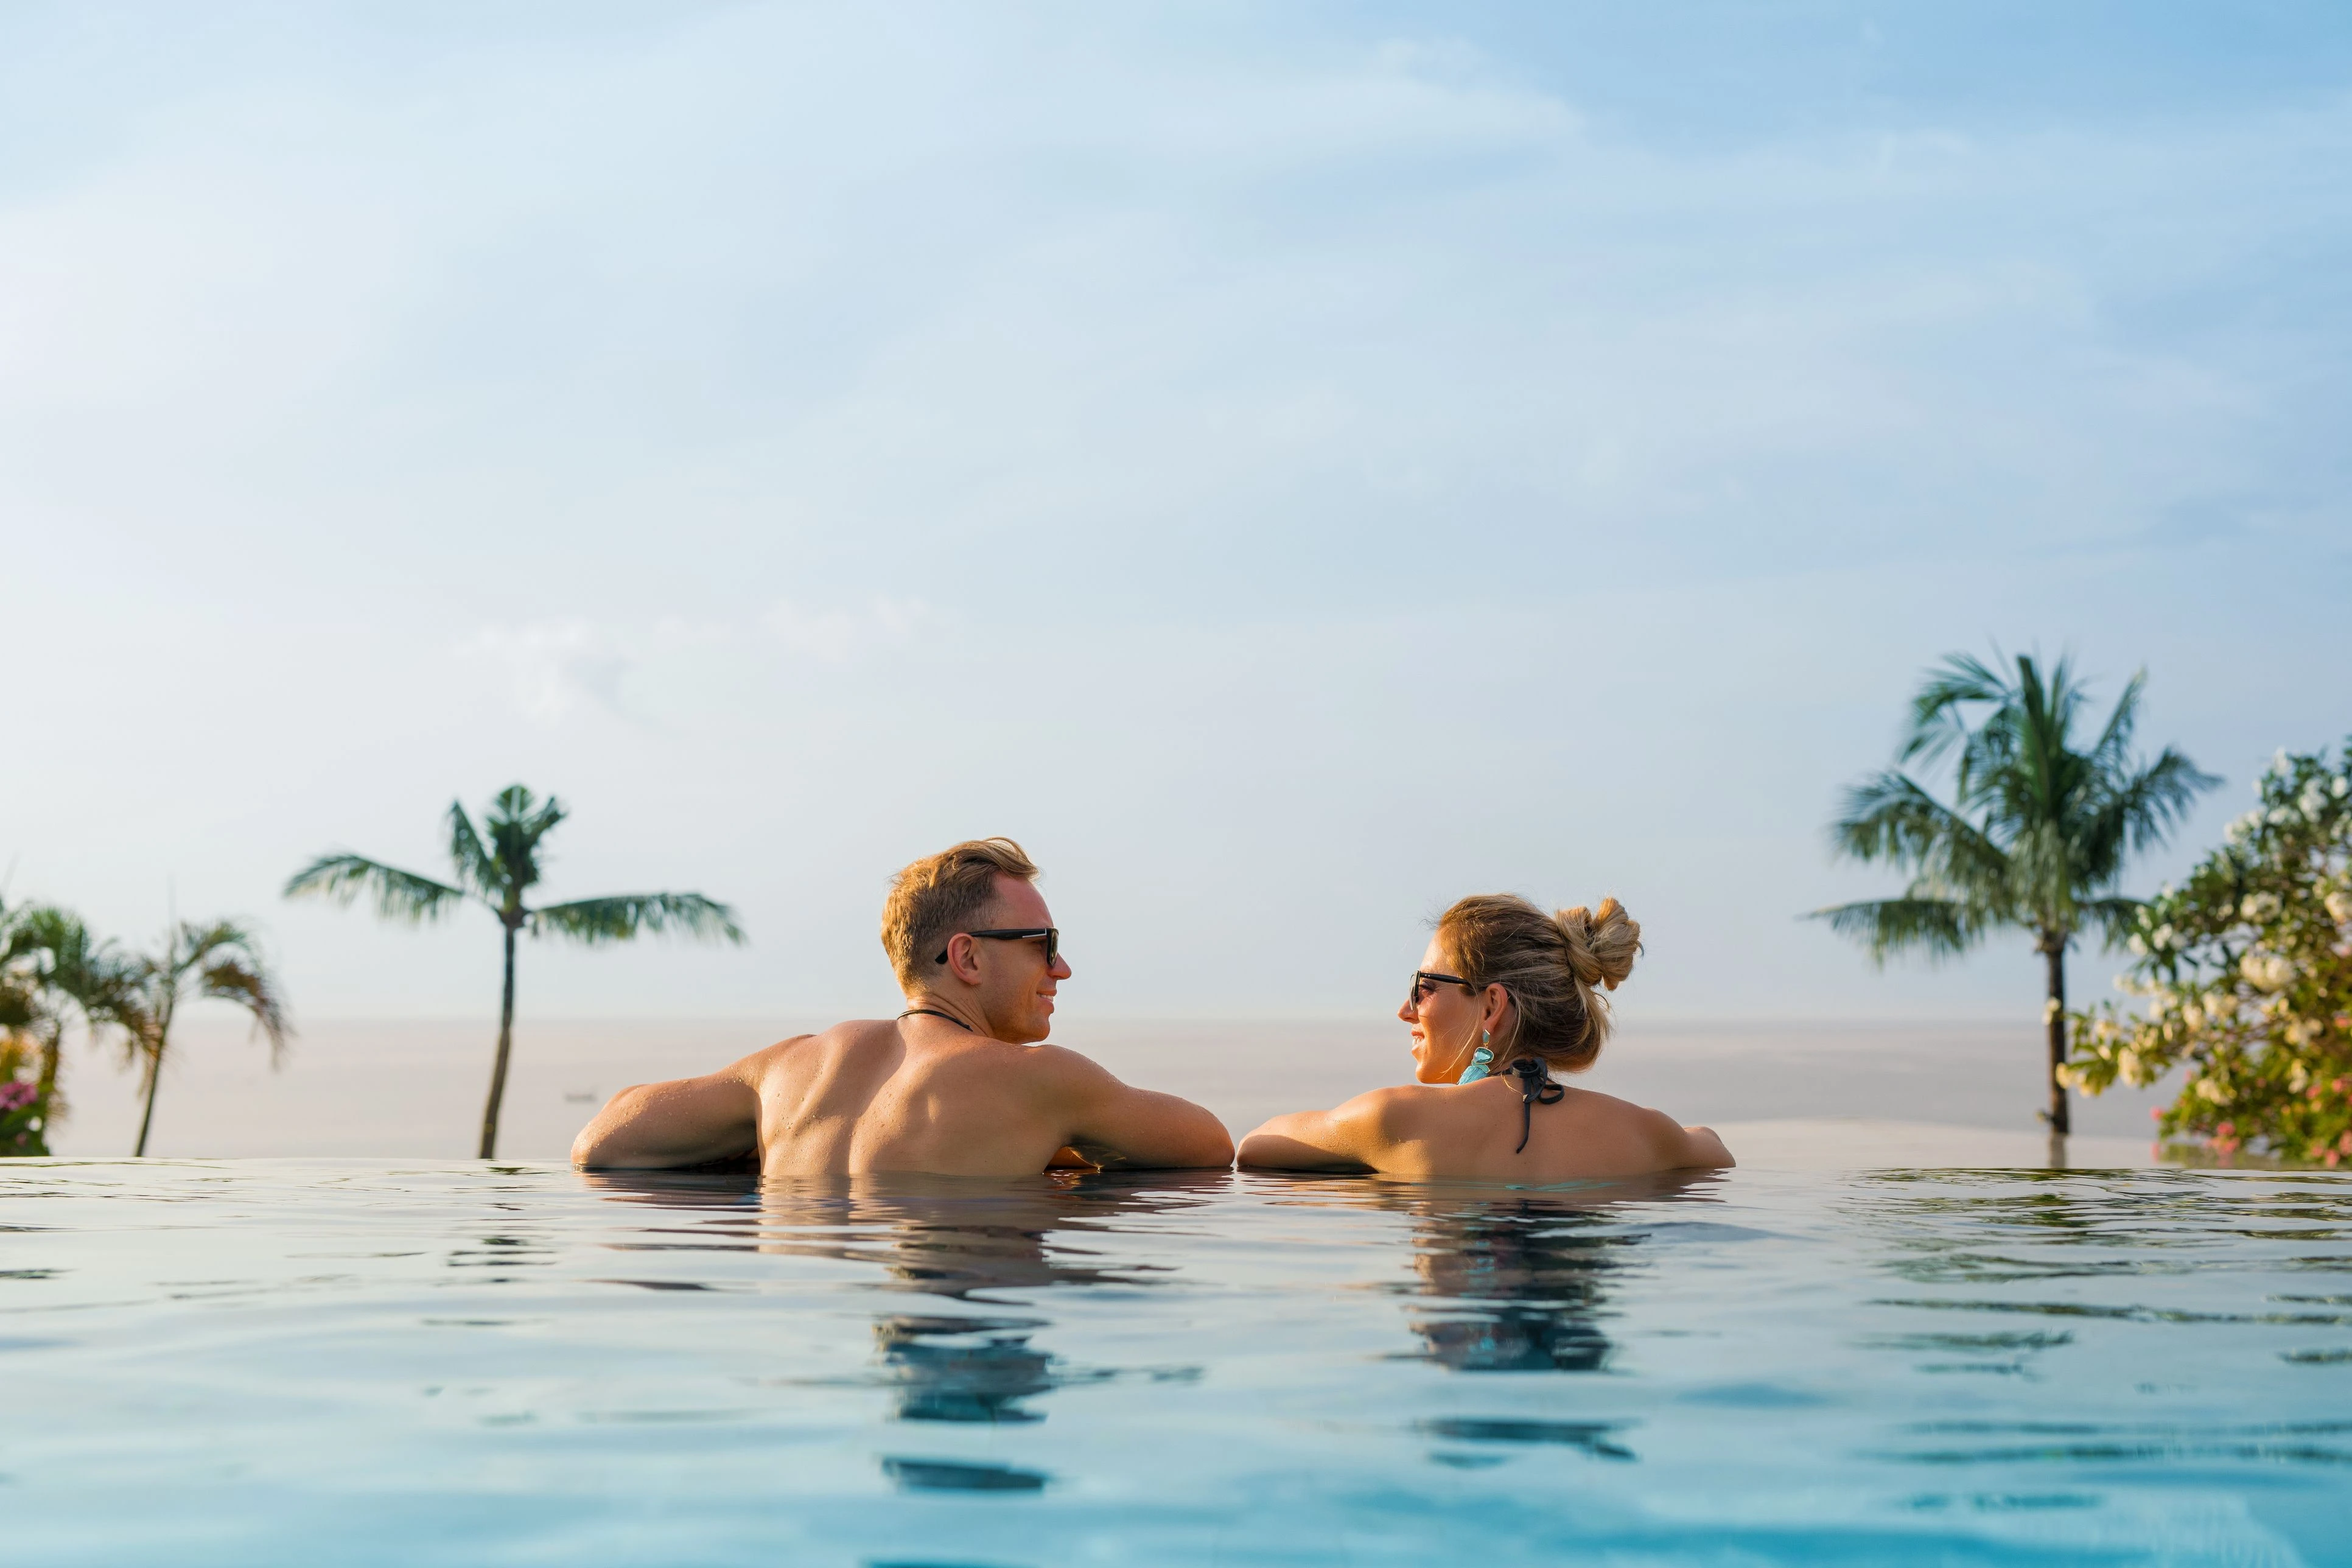 Turks and Caicos vs Grand Cayman: Which Island is Best for Couples?